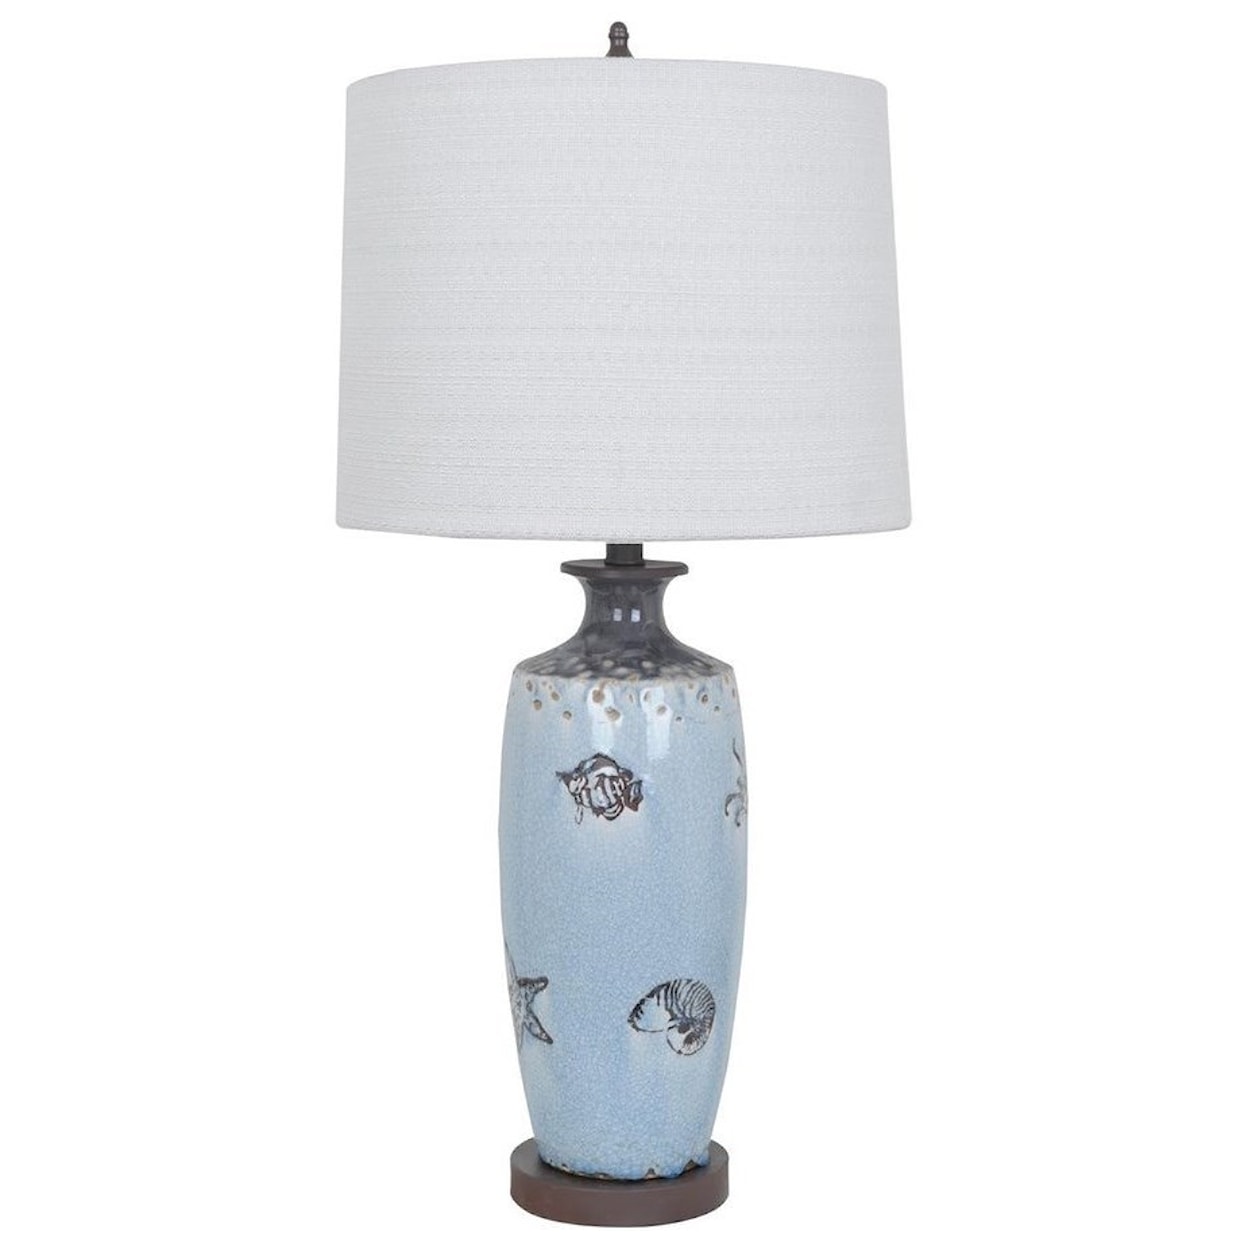 Crestview Collection Lighting Costal Marine Table Lamp